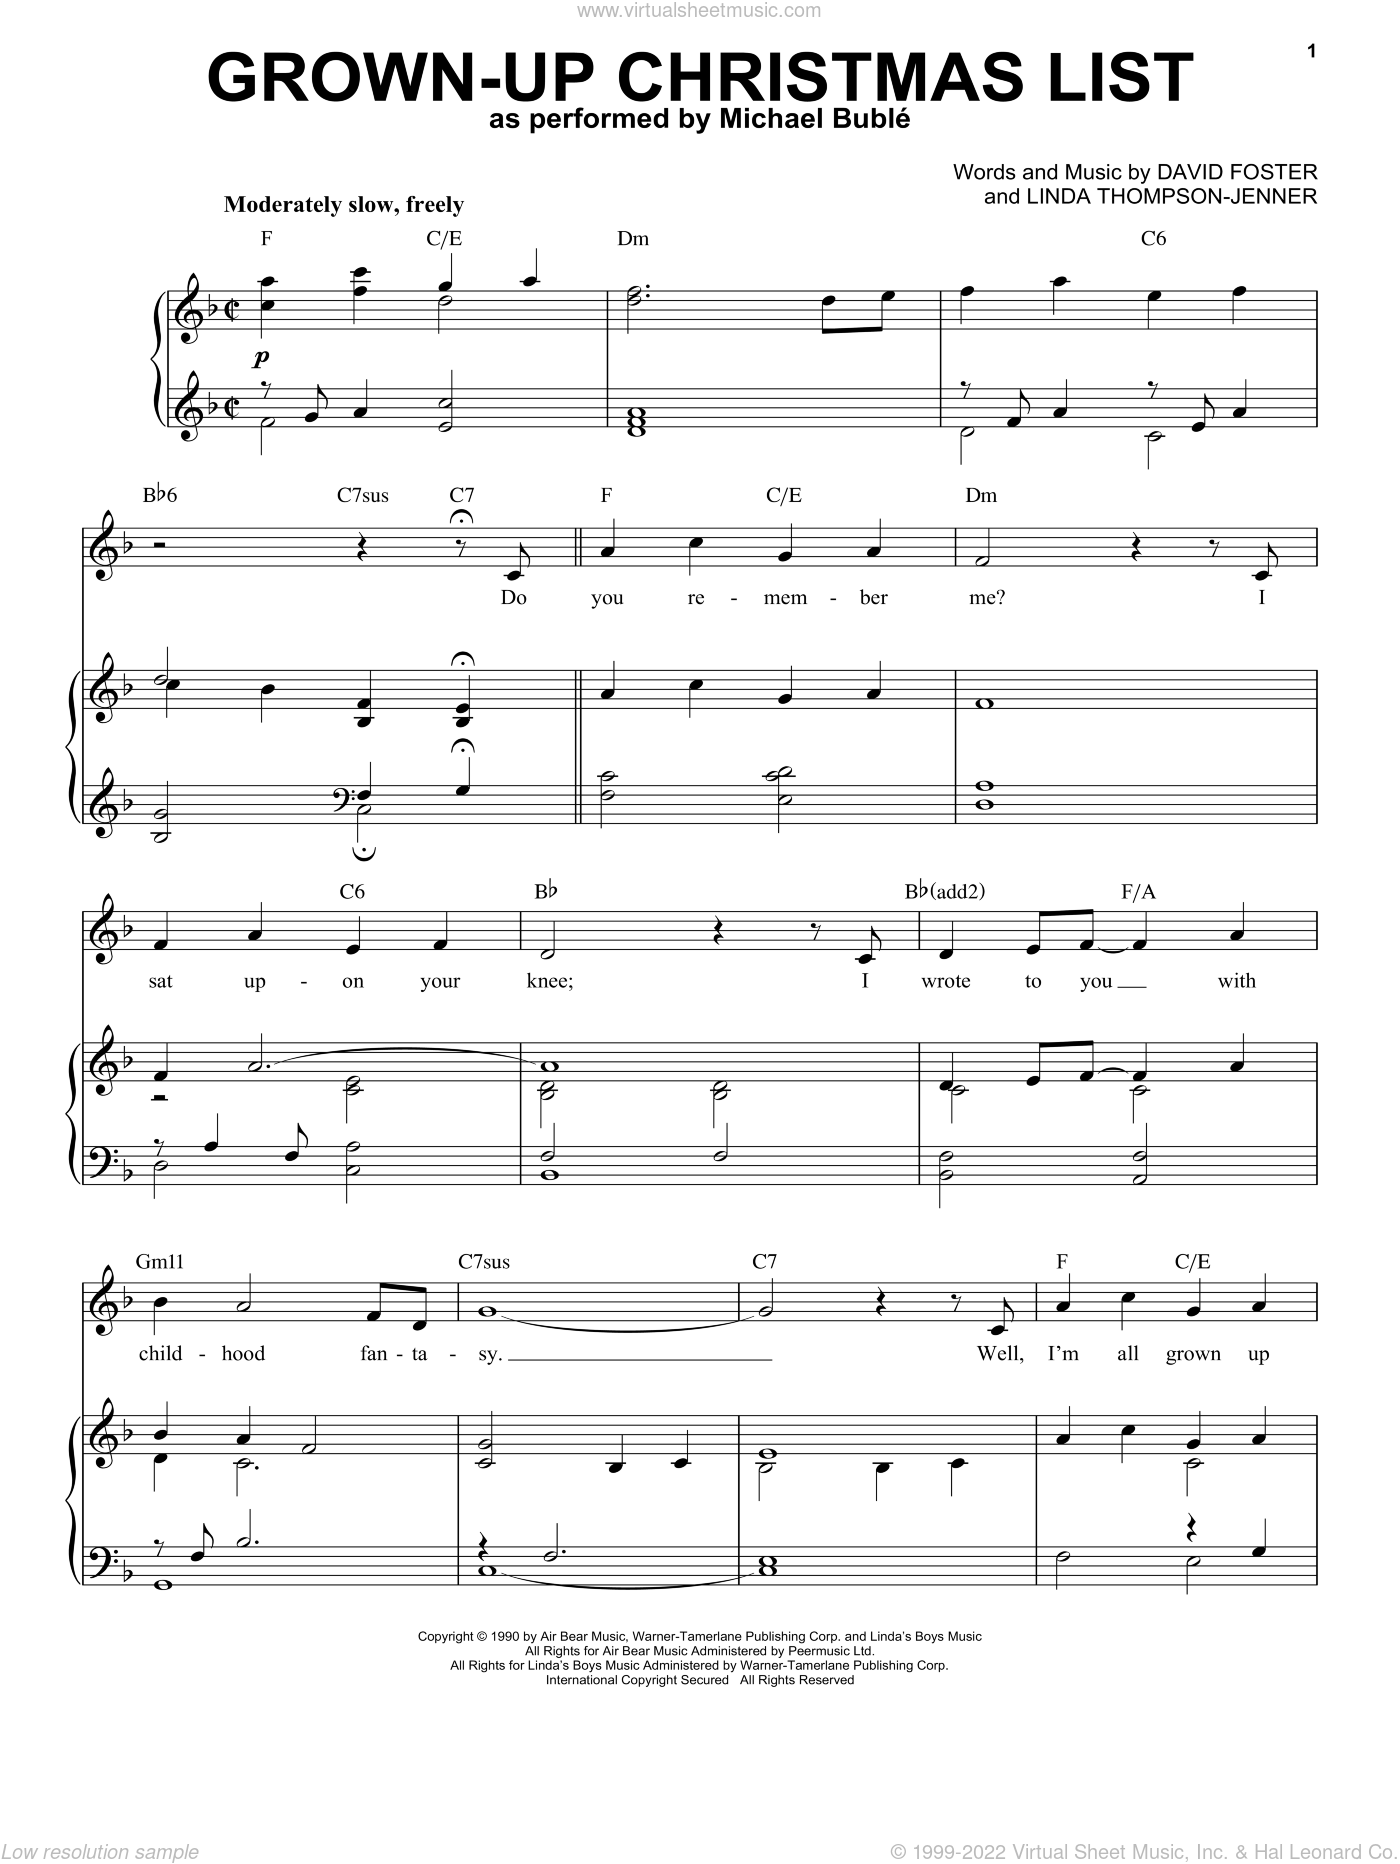 Buble - Grown-Up Christmas List sheet music for voice and piano